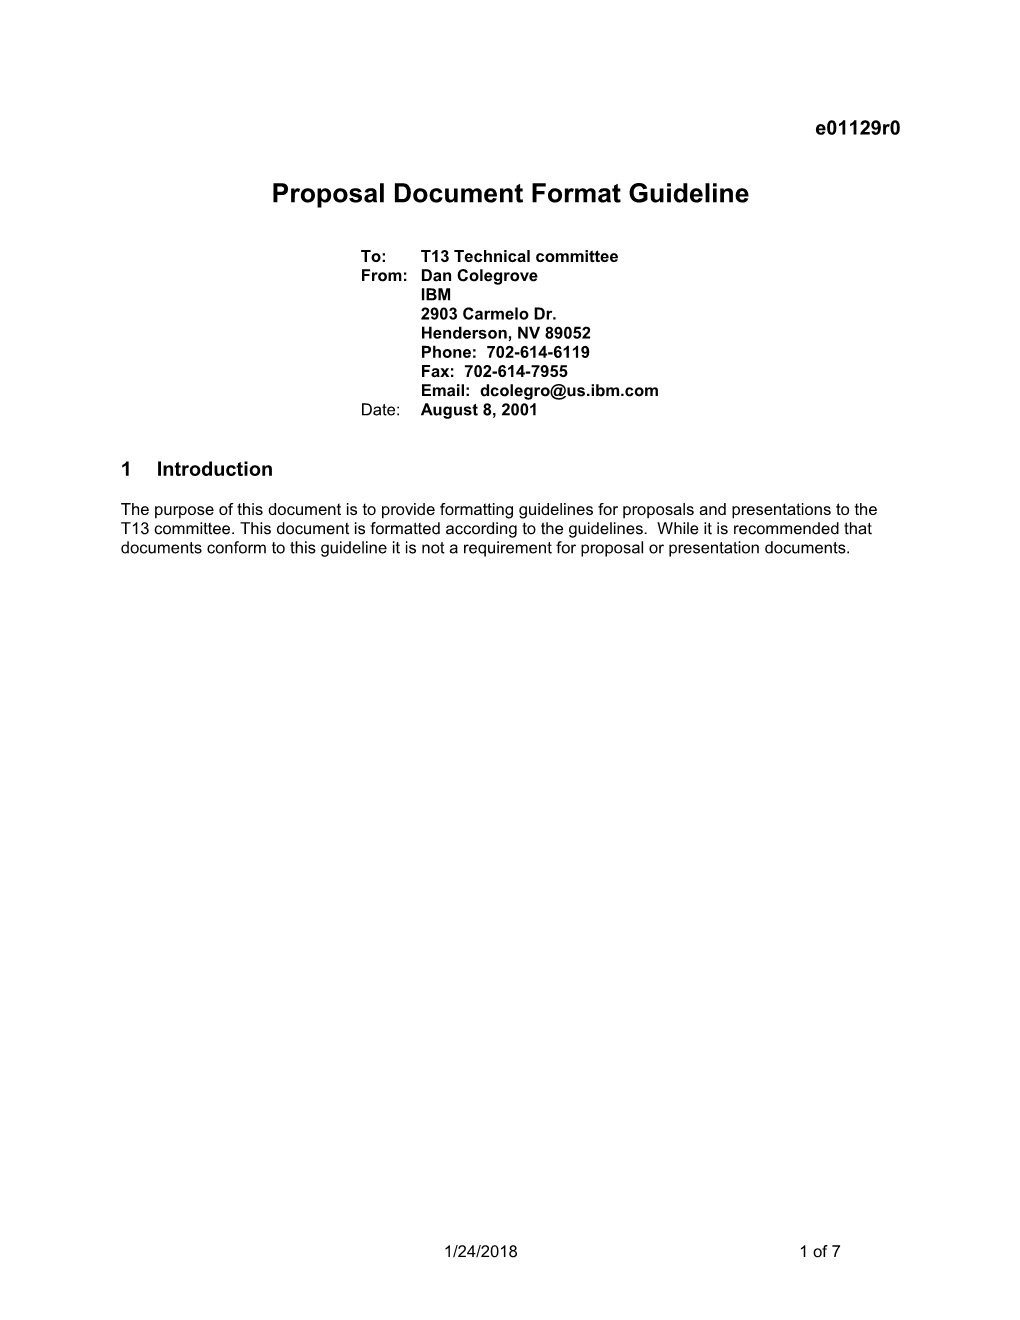 Proposal Document Format Guideline